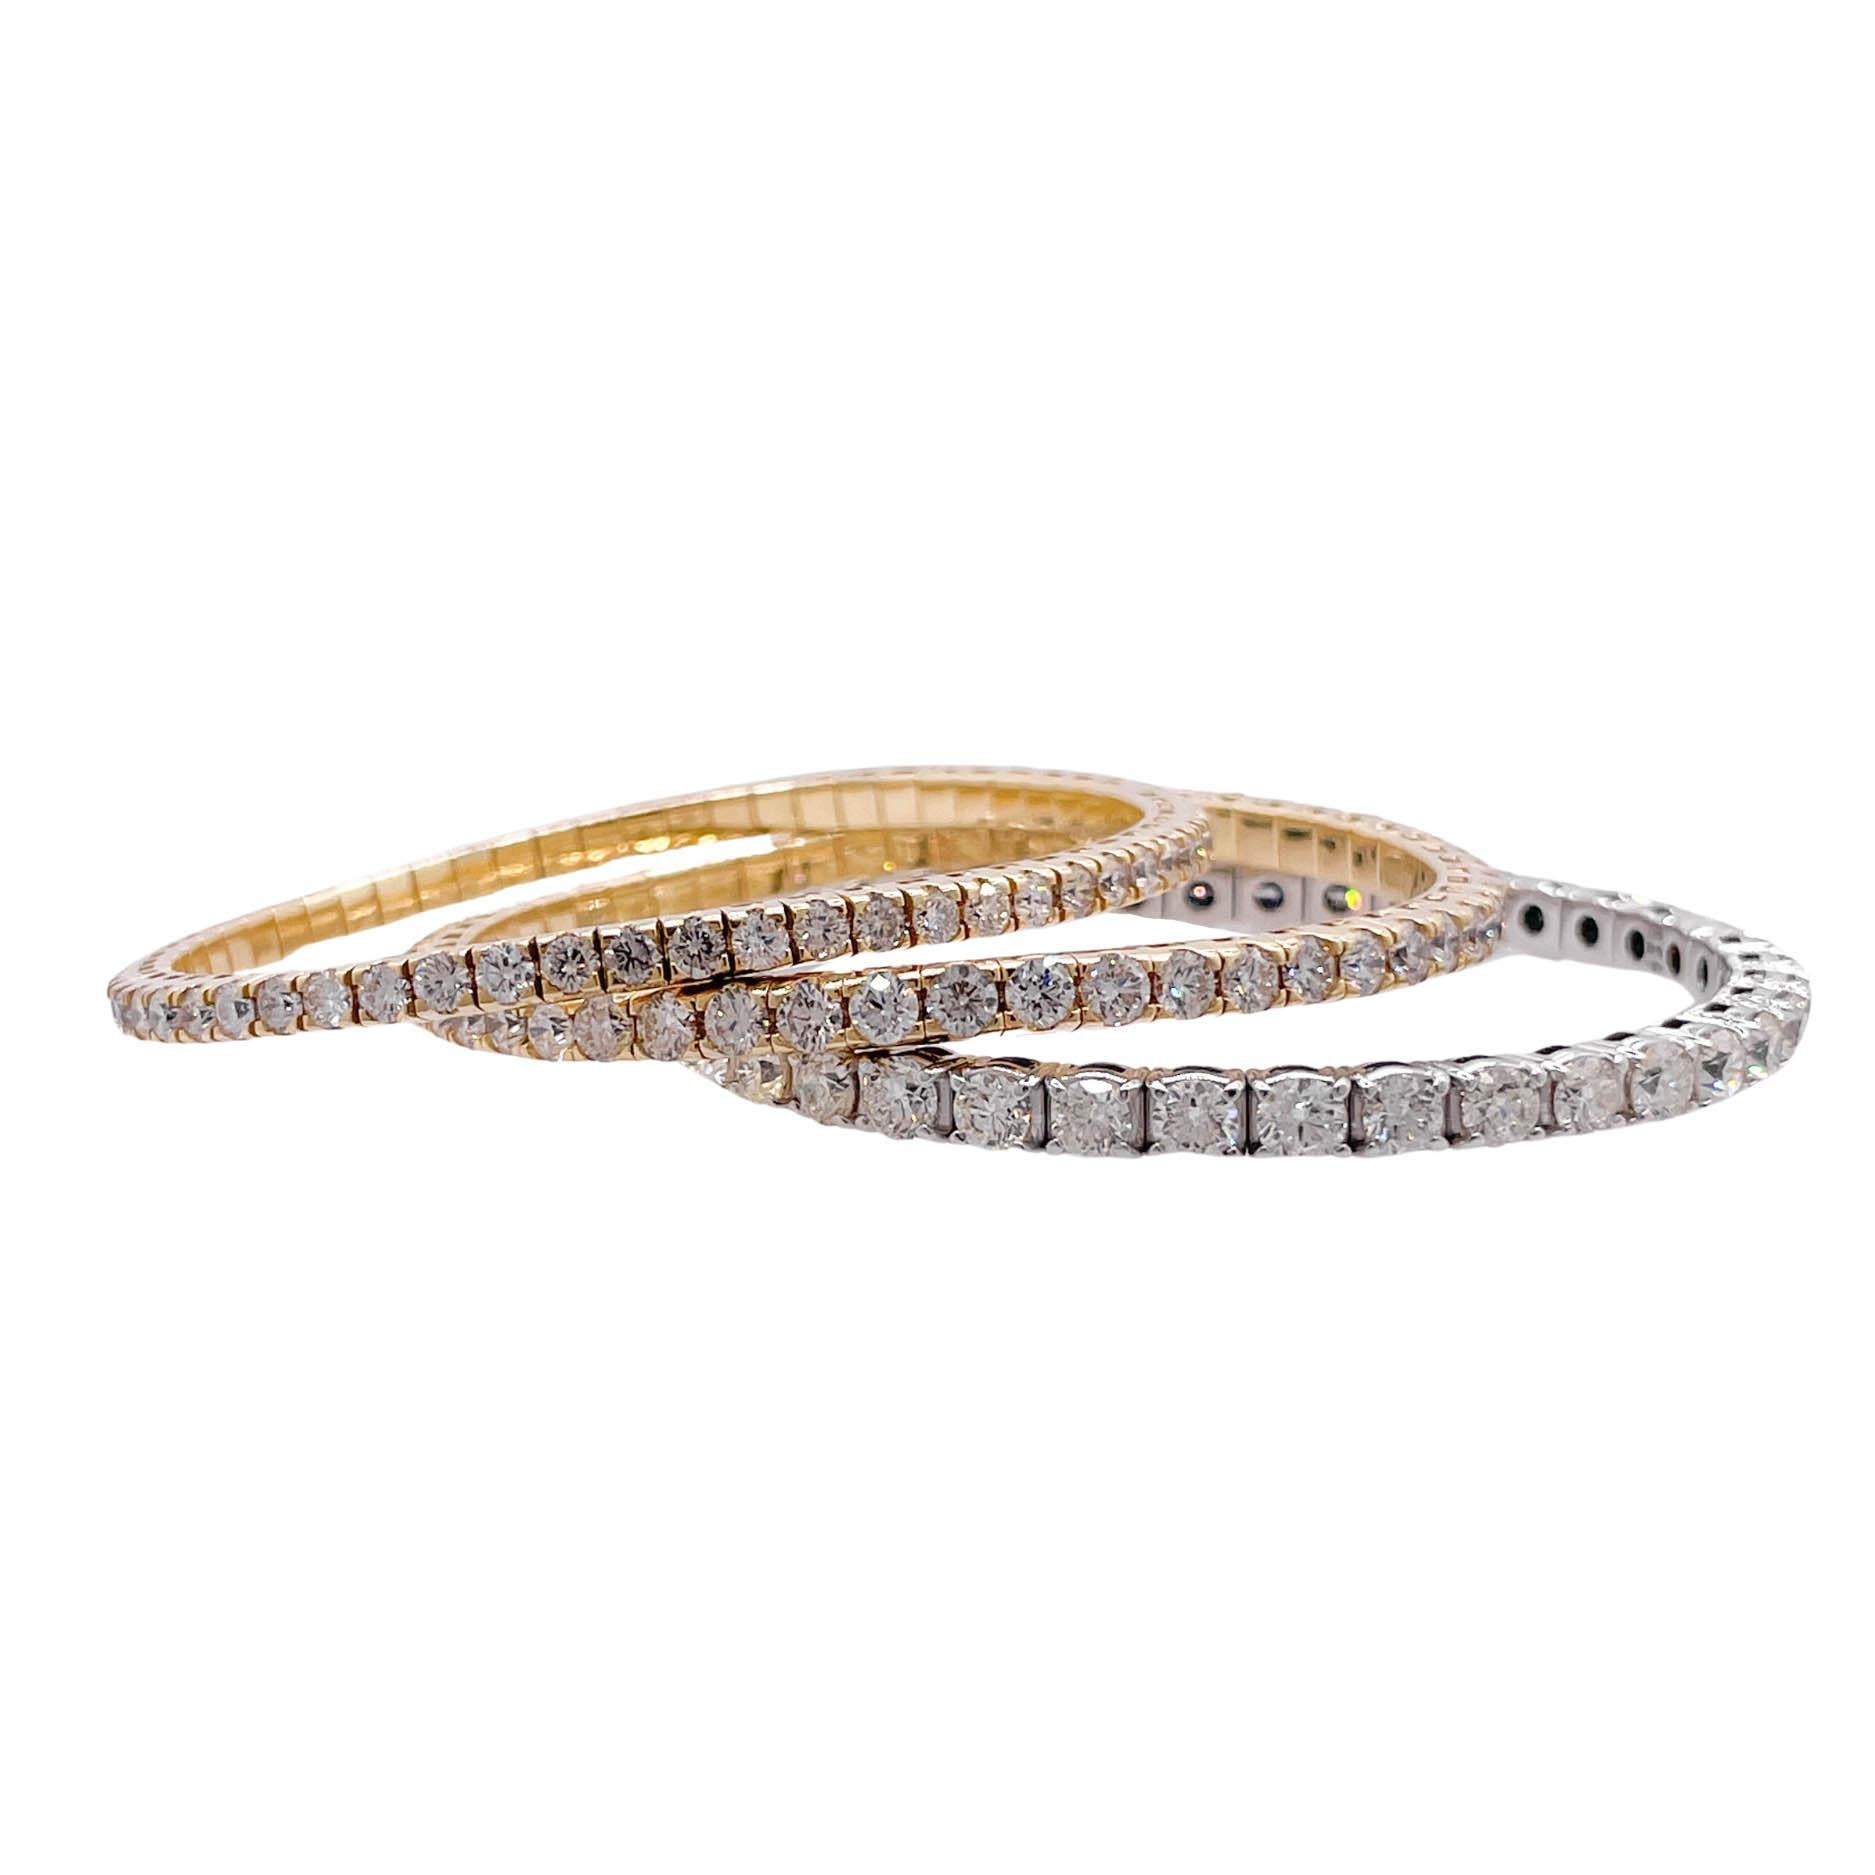 Jay Feder 18k Yellow Gold Diamond Stretchy Tennis Bangle Bracelet In Excellent Condition For Sale In Boca Raton, FL